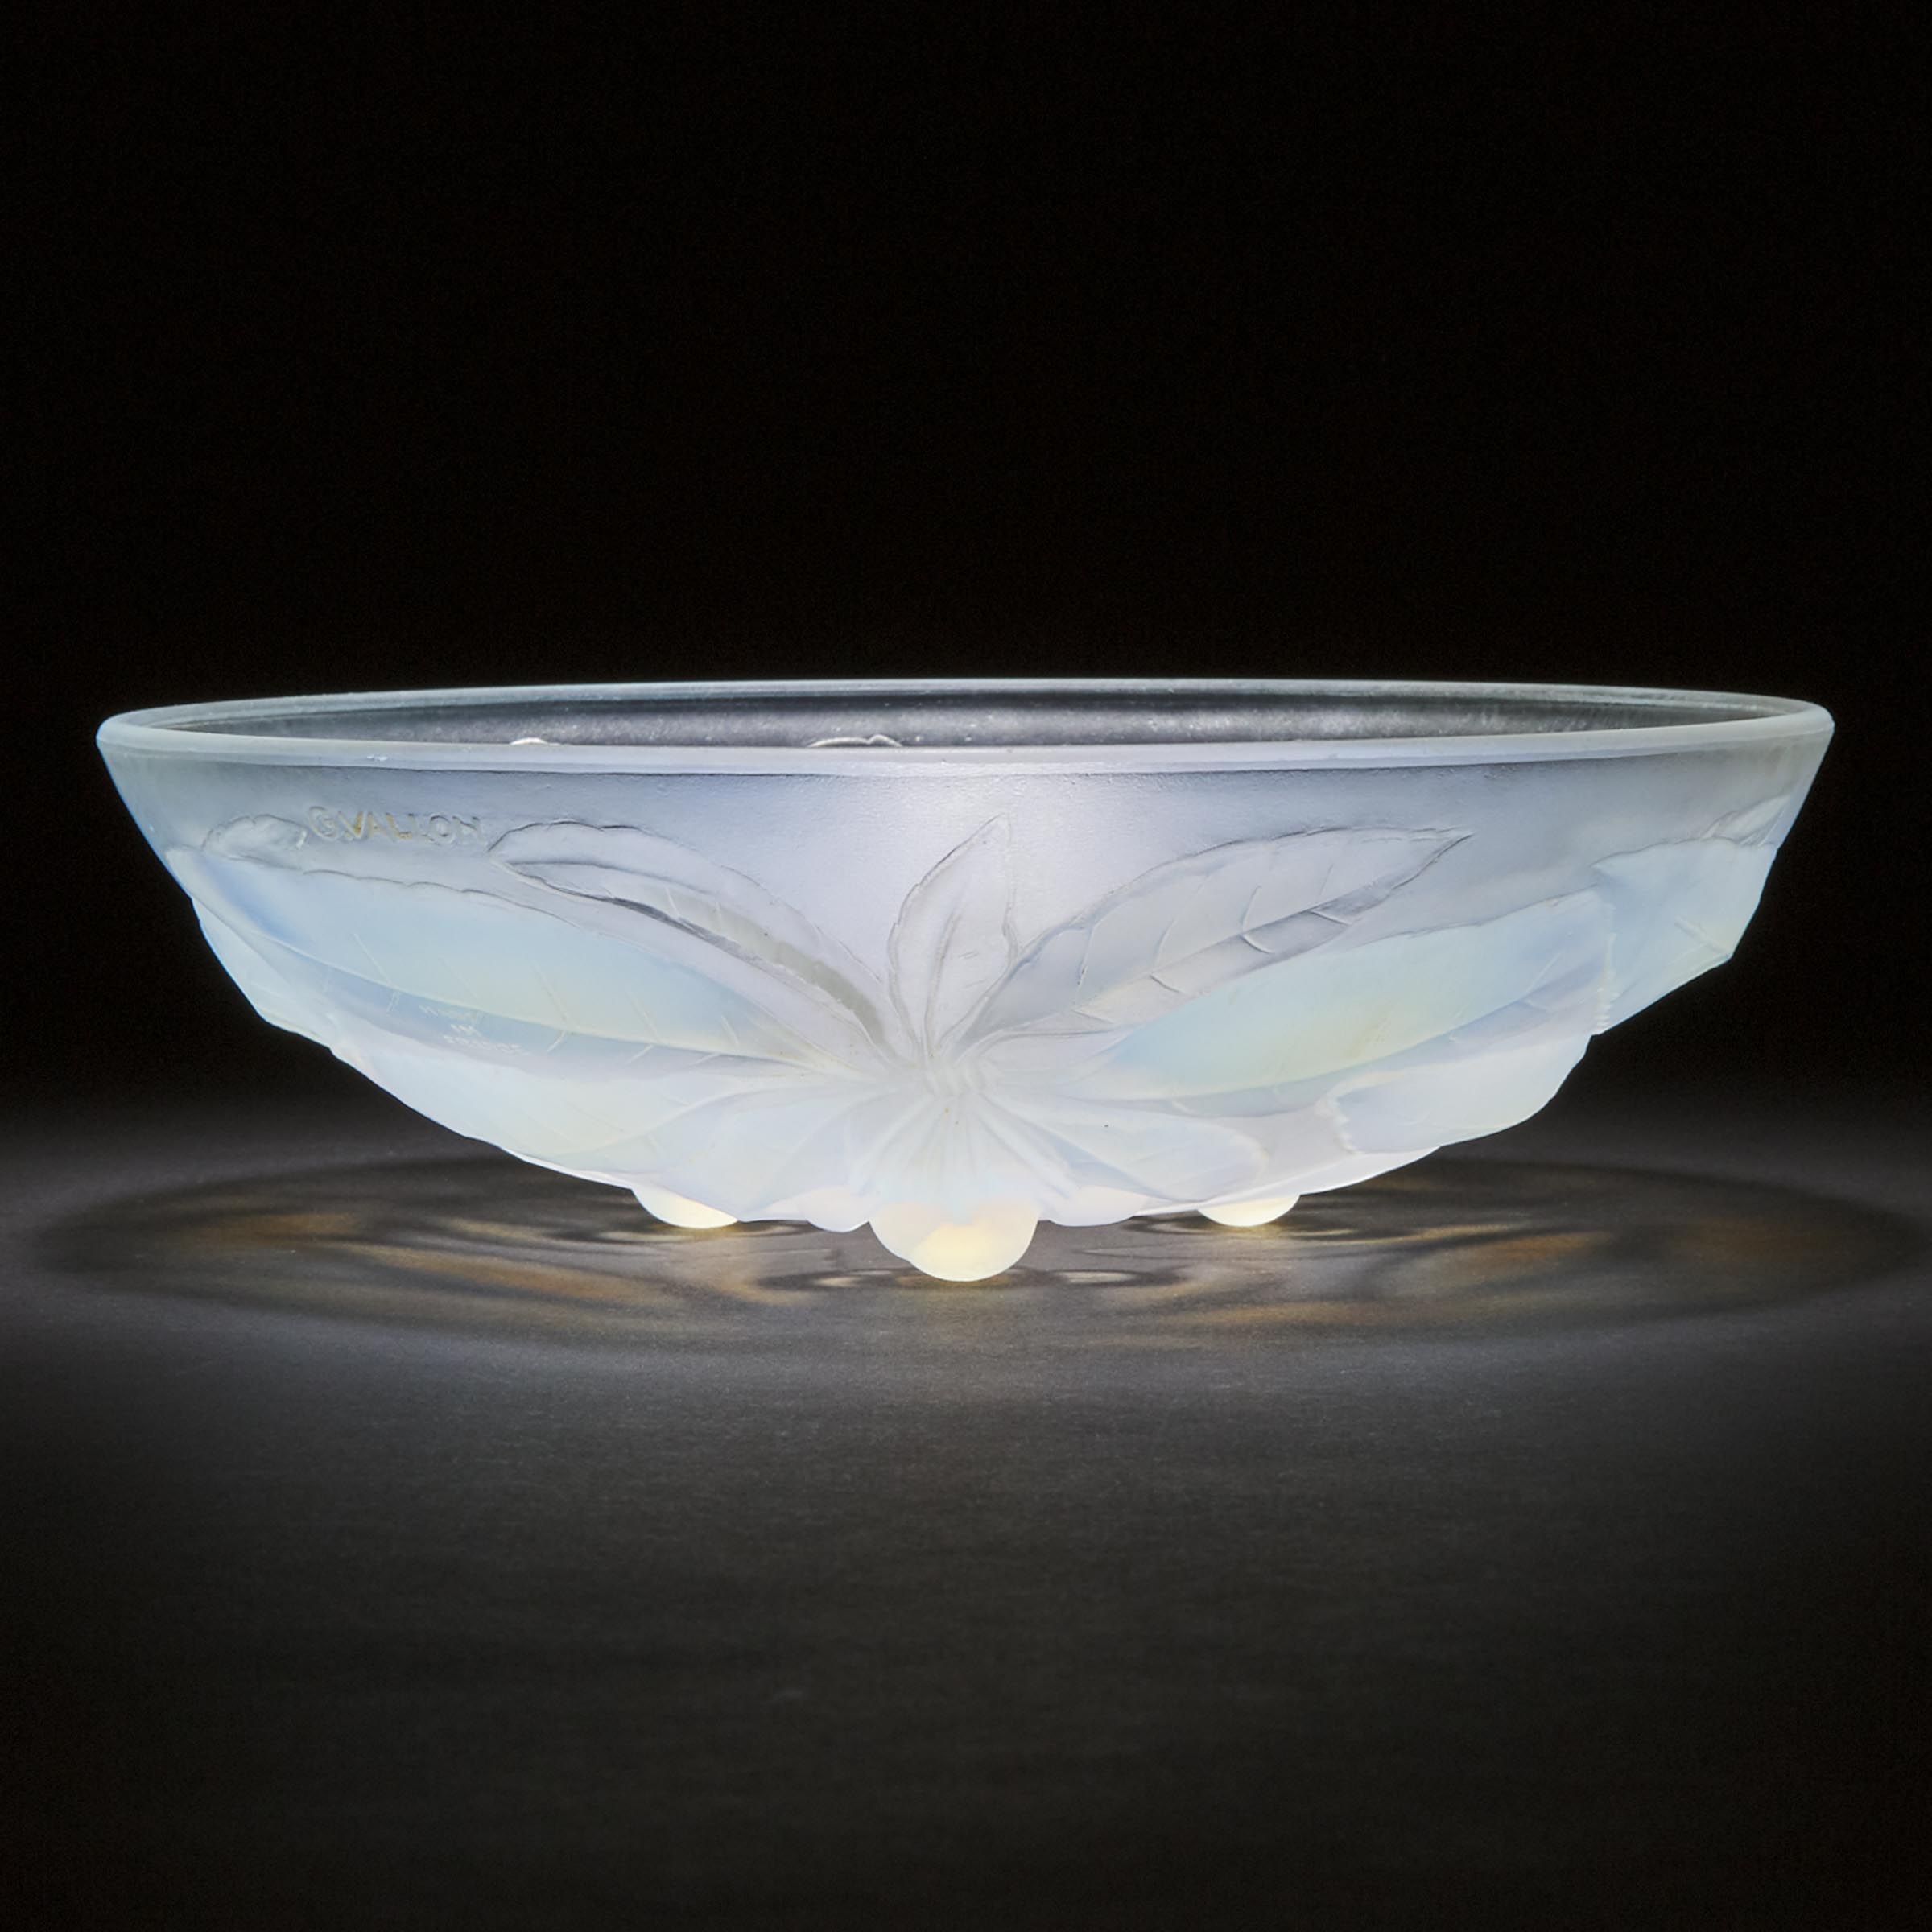 G. Vallon Moulded and Frosted Opalescent Glass Bowl, mid-20th century